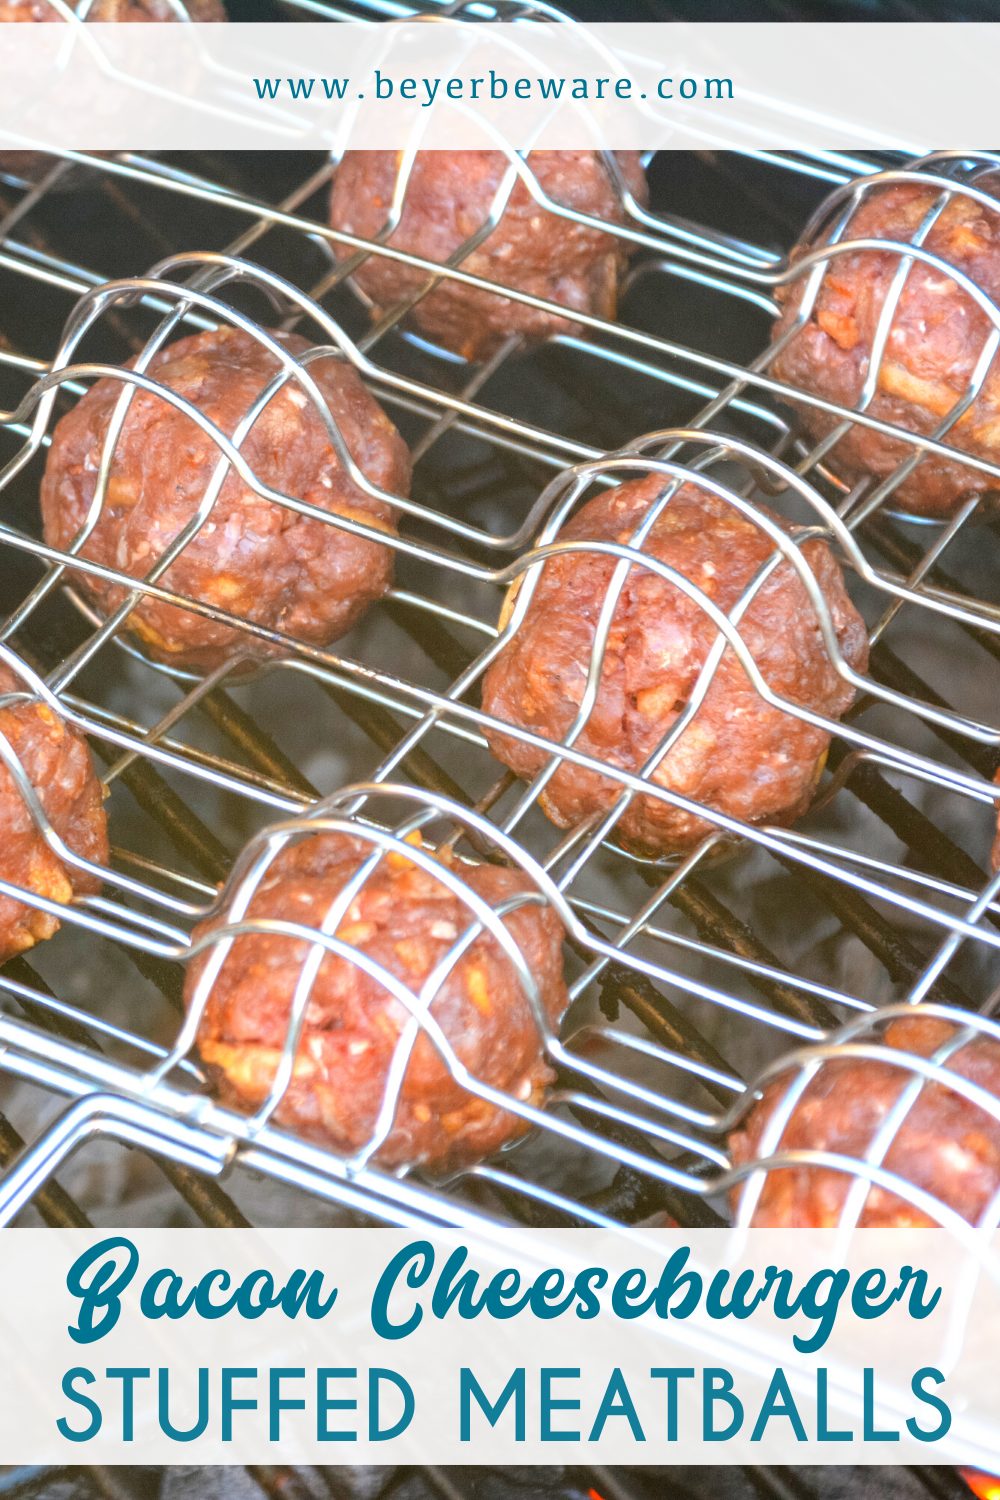 Bacon Cheeseburger meatballs on the grill